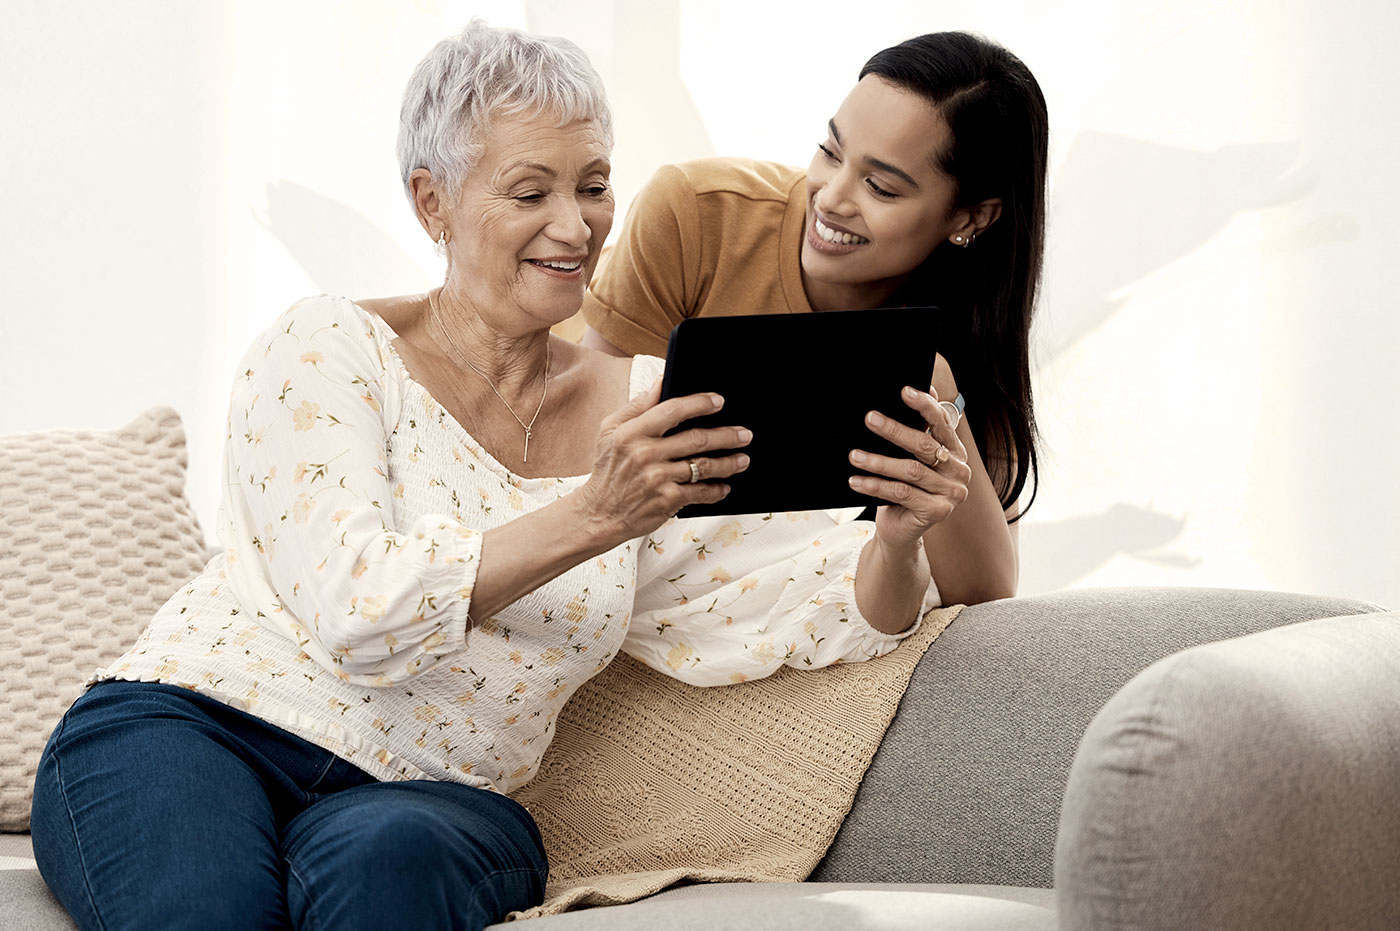 Young woman holding a tablet in front of a older woman smiling